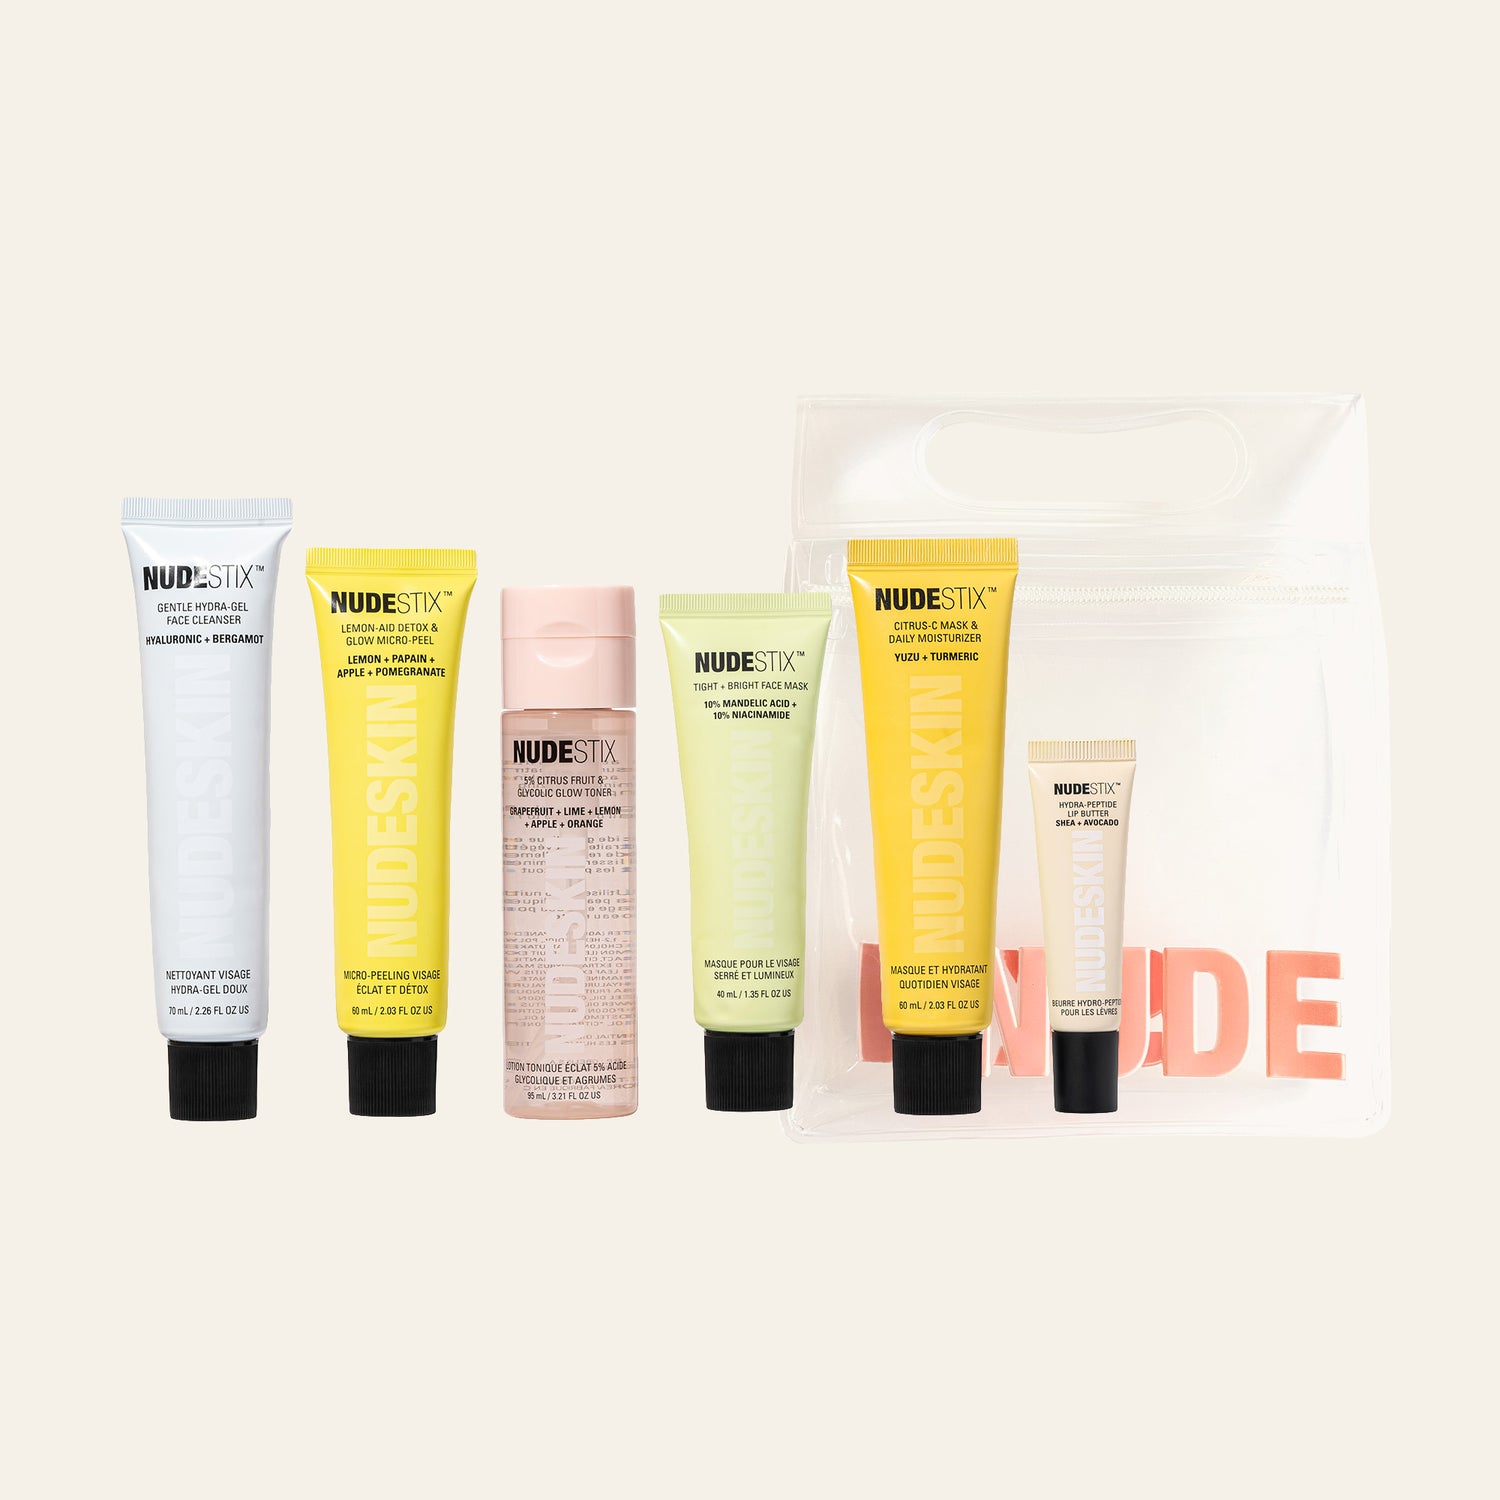 All Nudeskin excl kits and sale